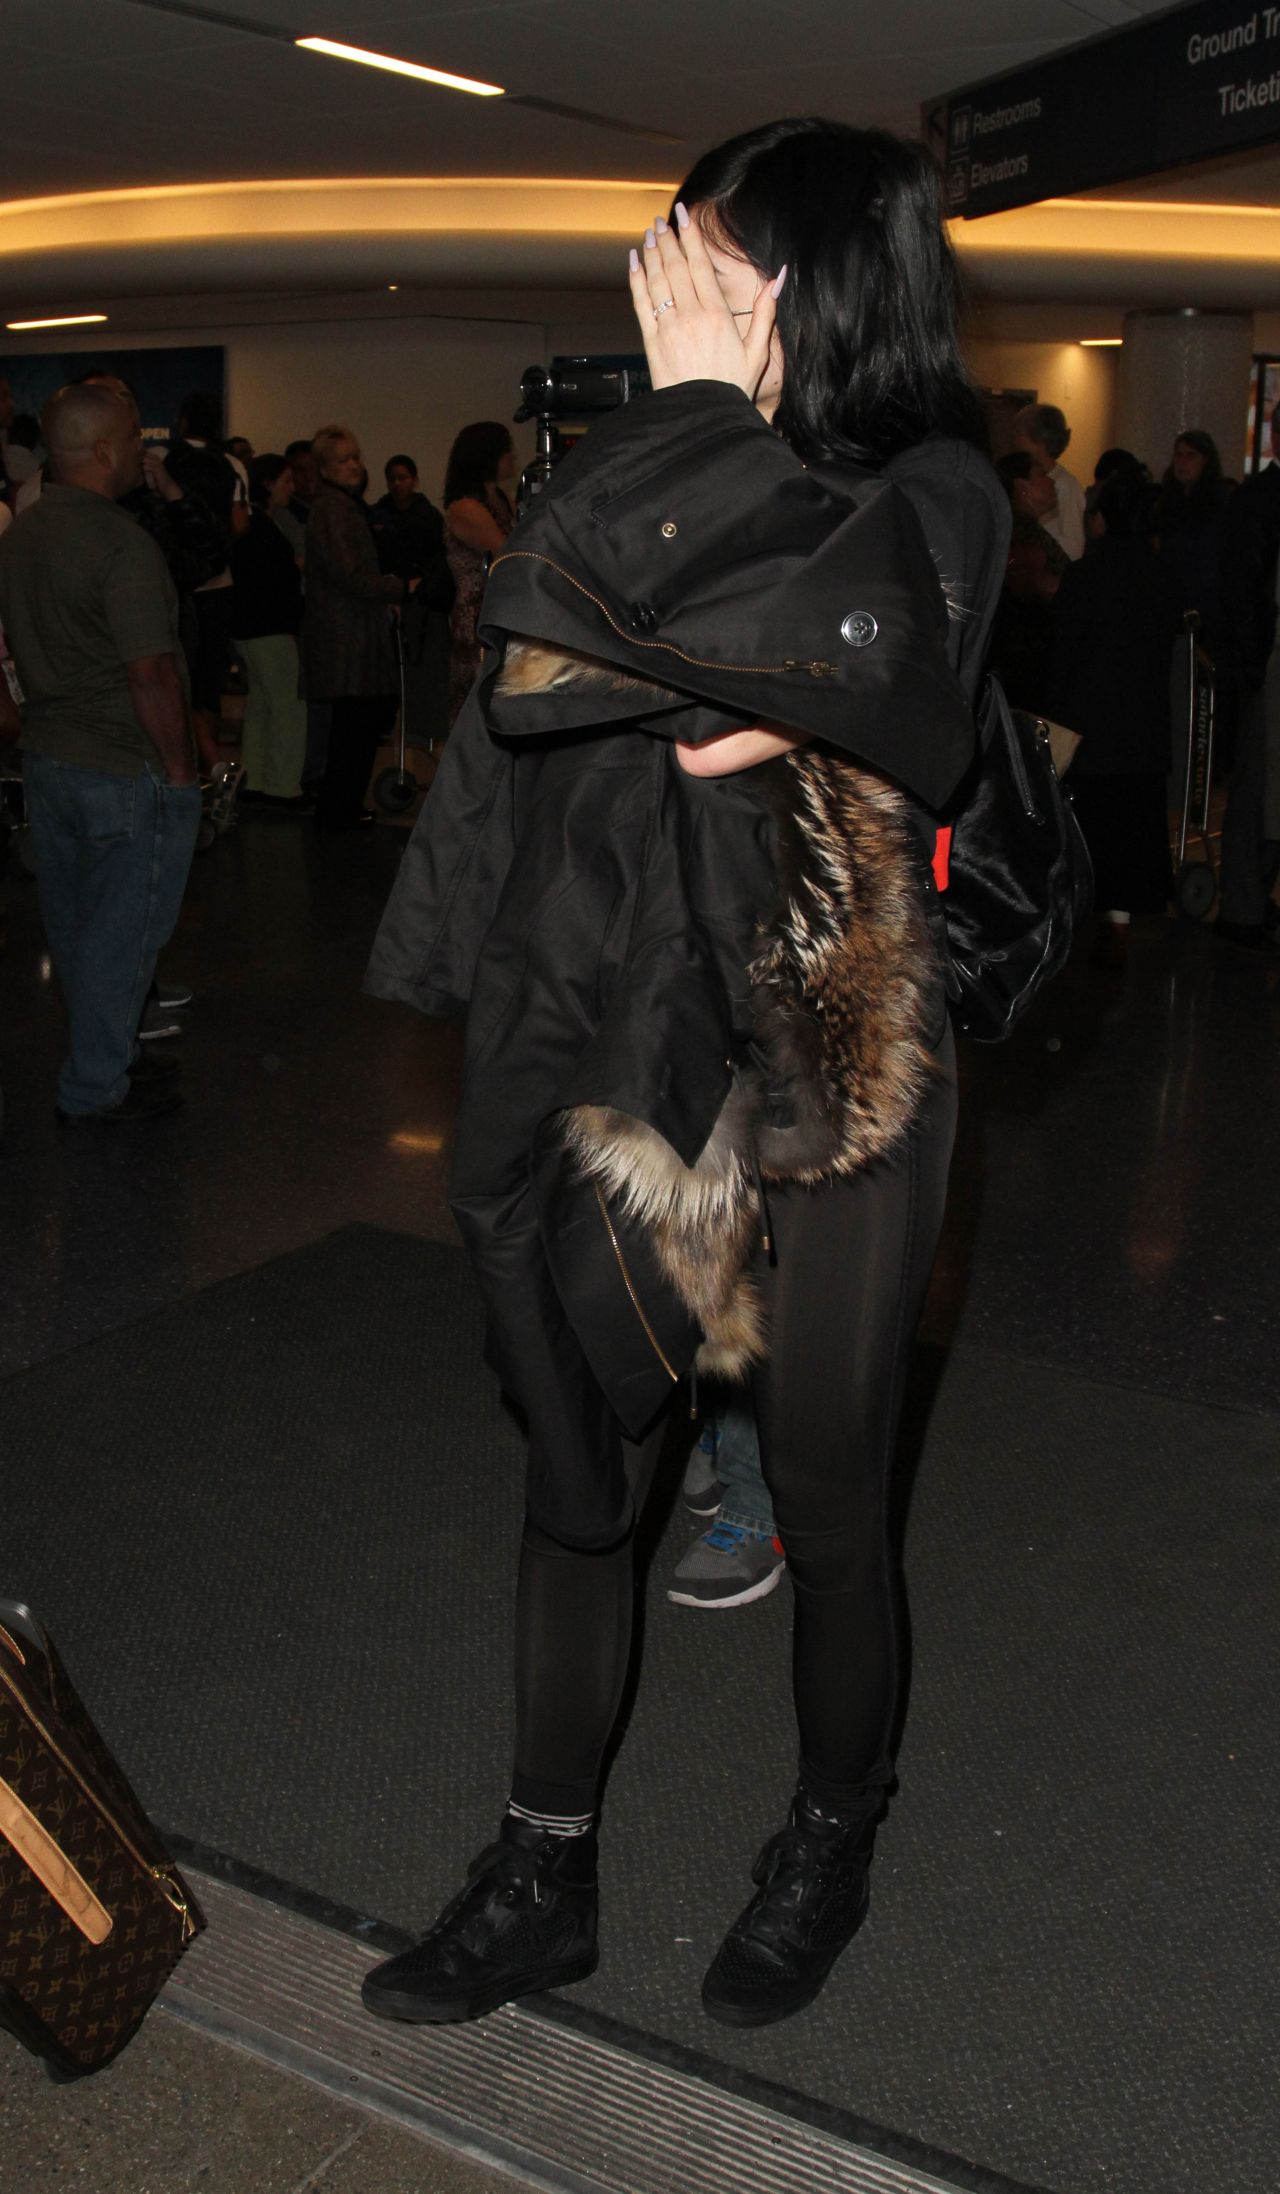 kylie-jenner-at-lax-airport-march-2015_6.jpg